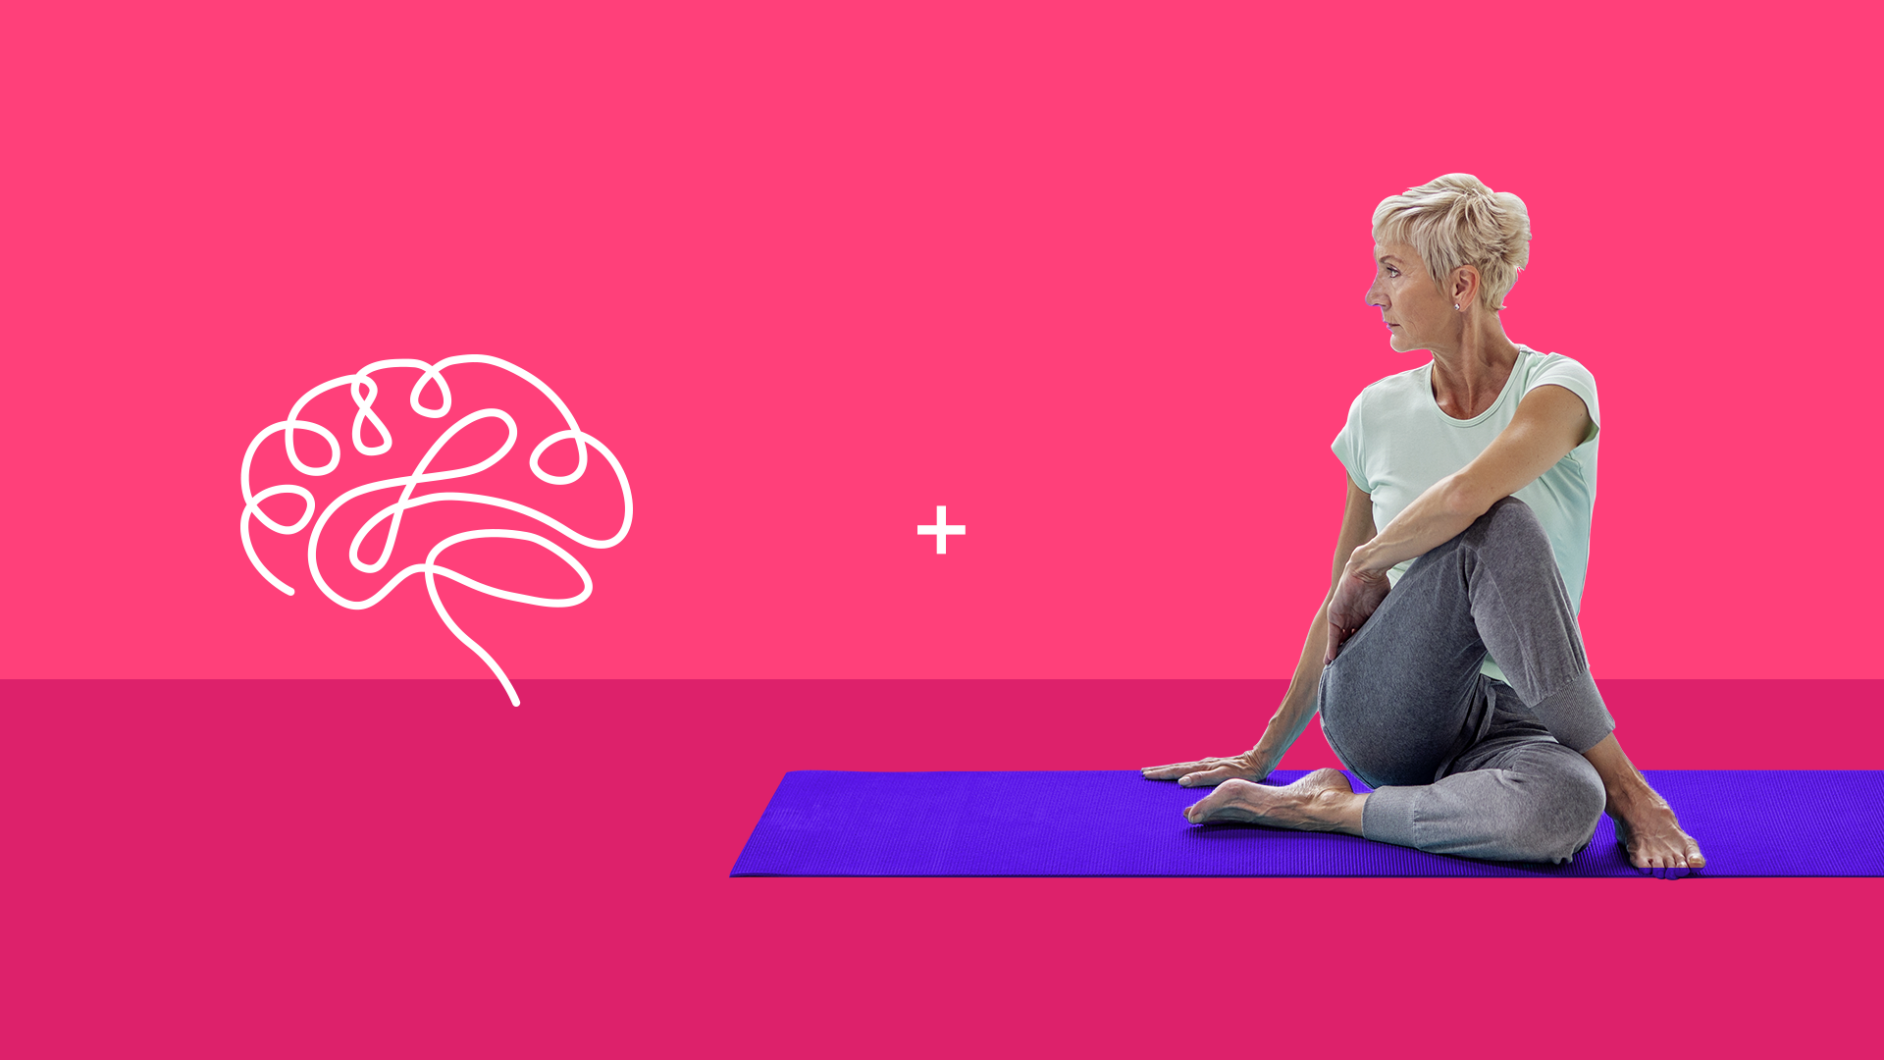 A brain and a woman doing yoga represents the mind body connection